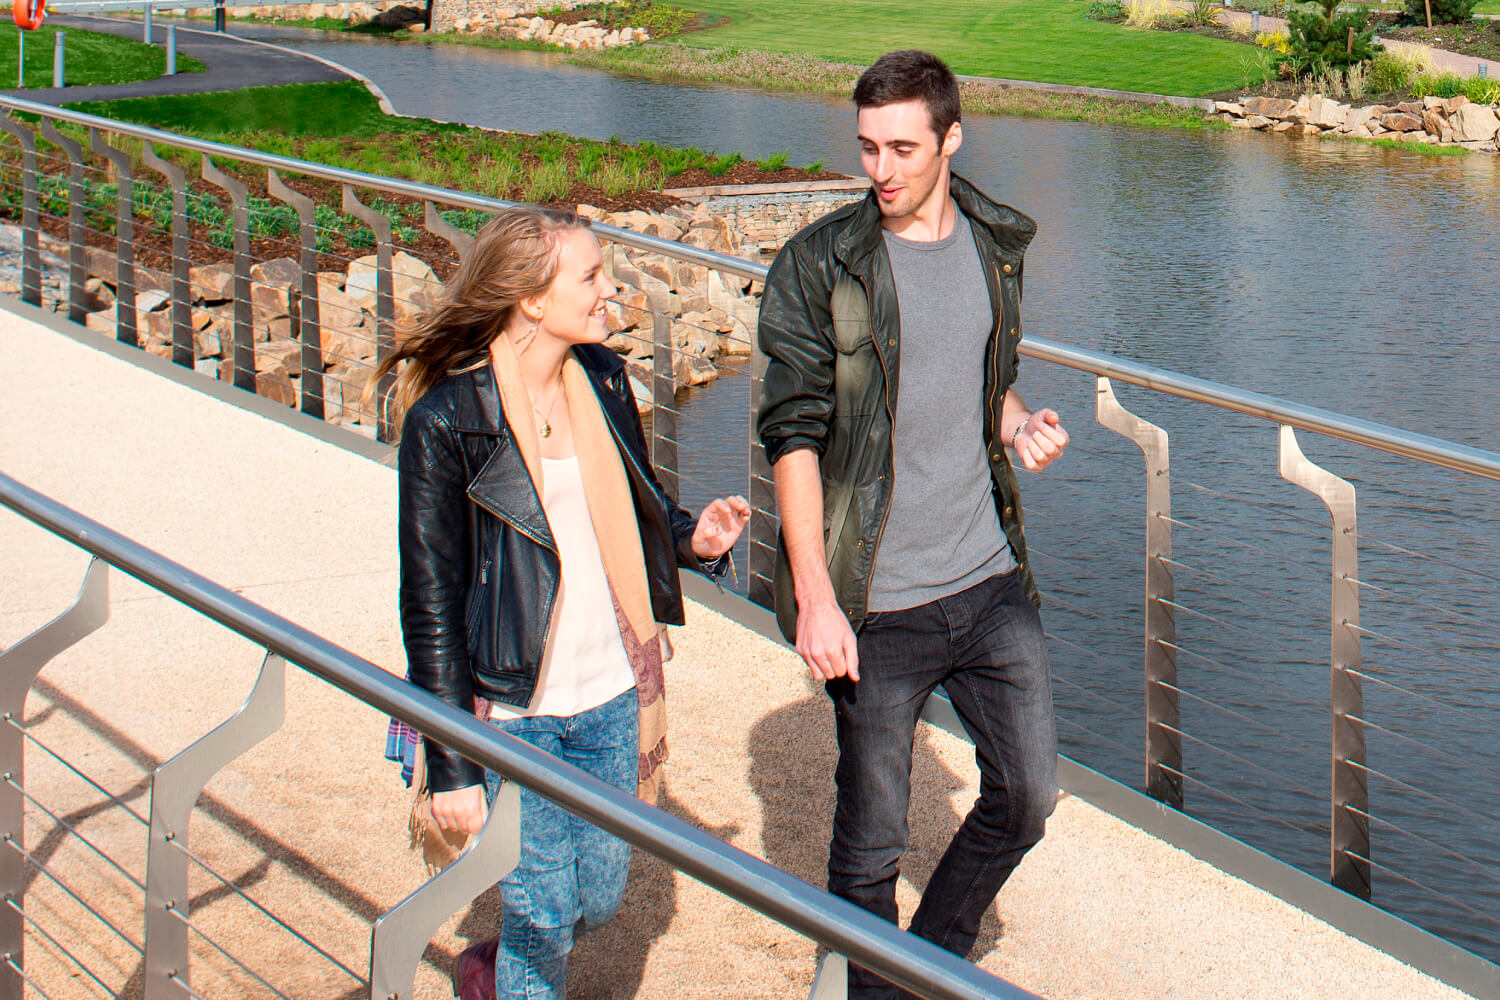 Campus and facilities - Two students walk across a bridge over a lake on the eastern side of the campus.